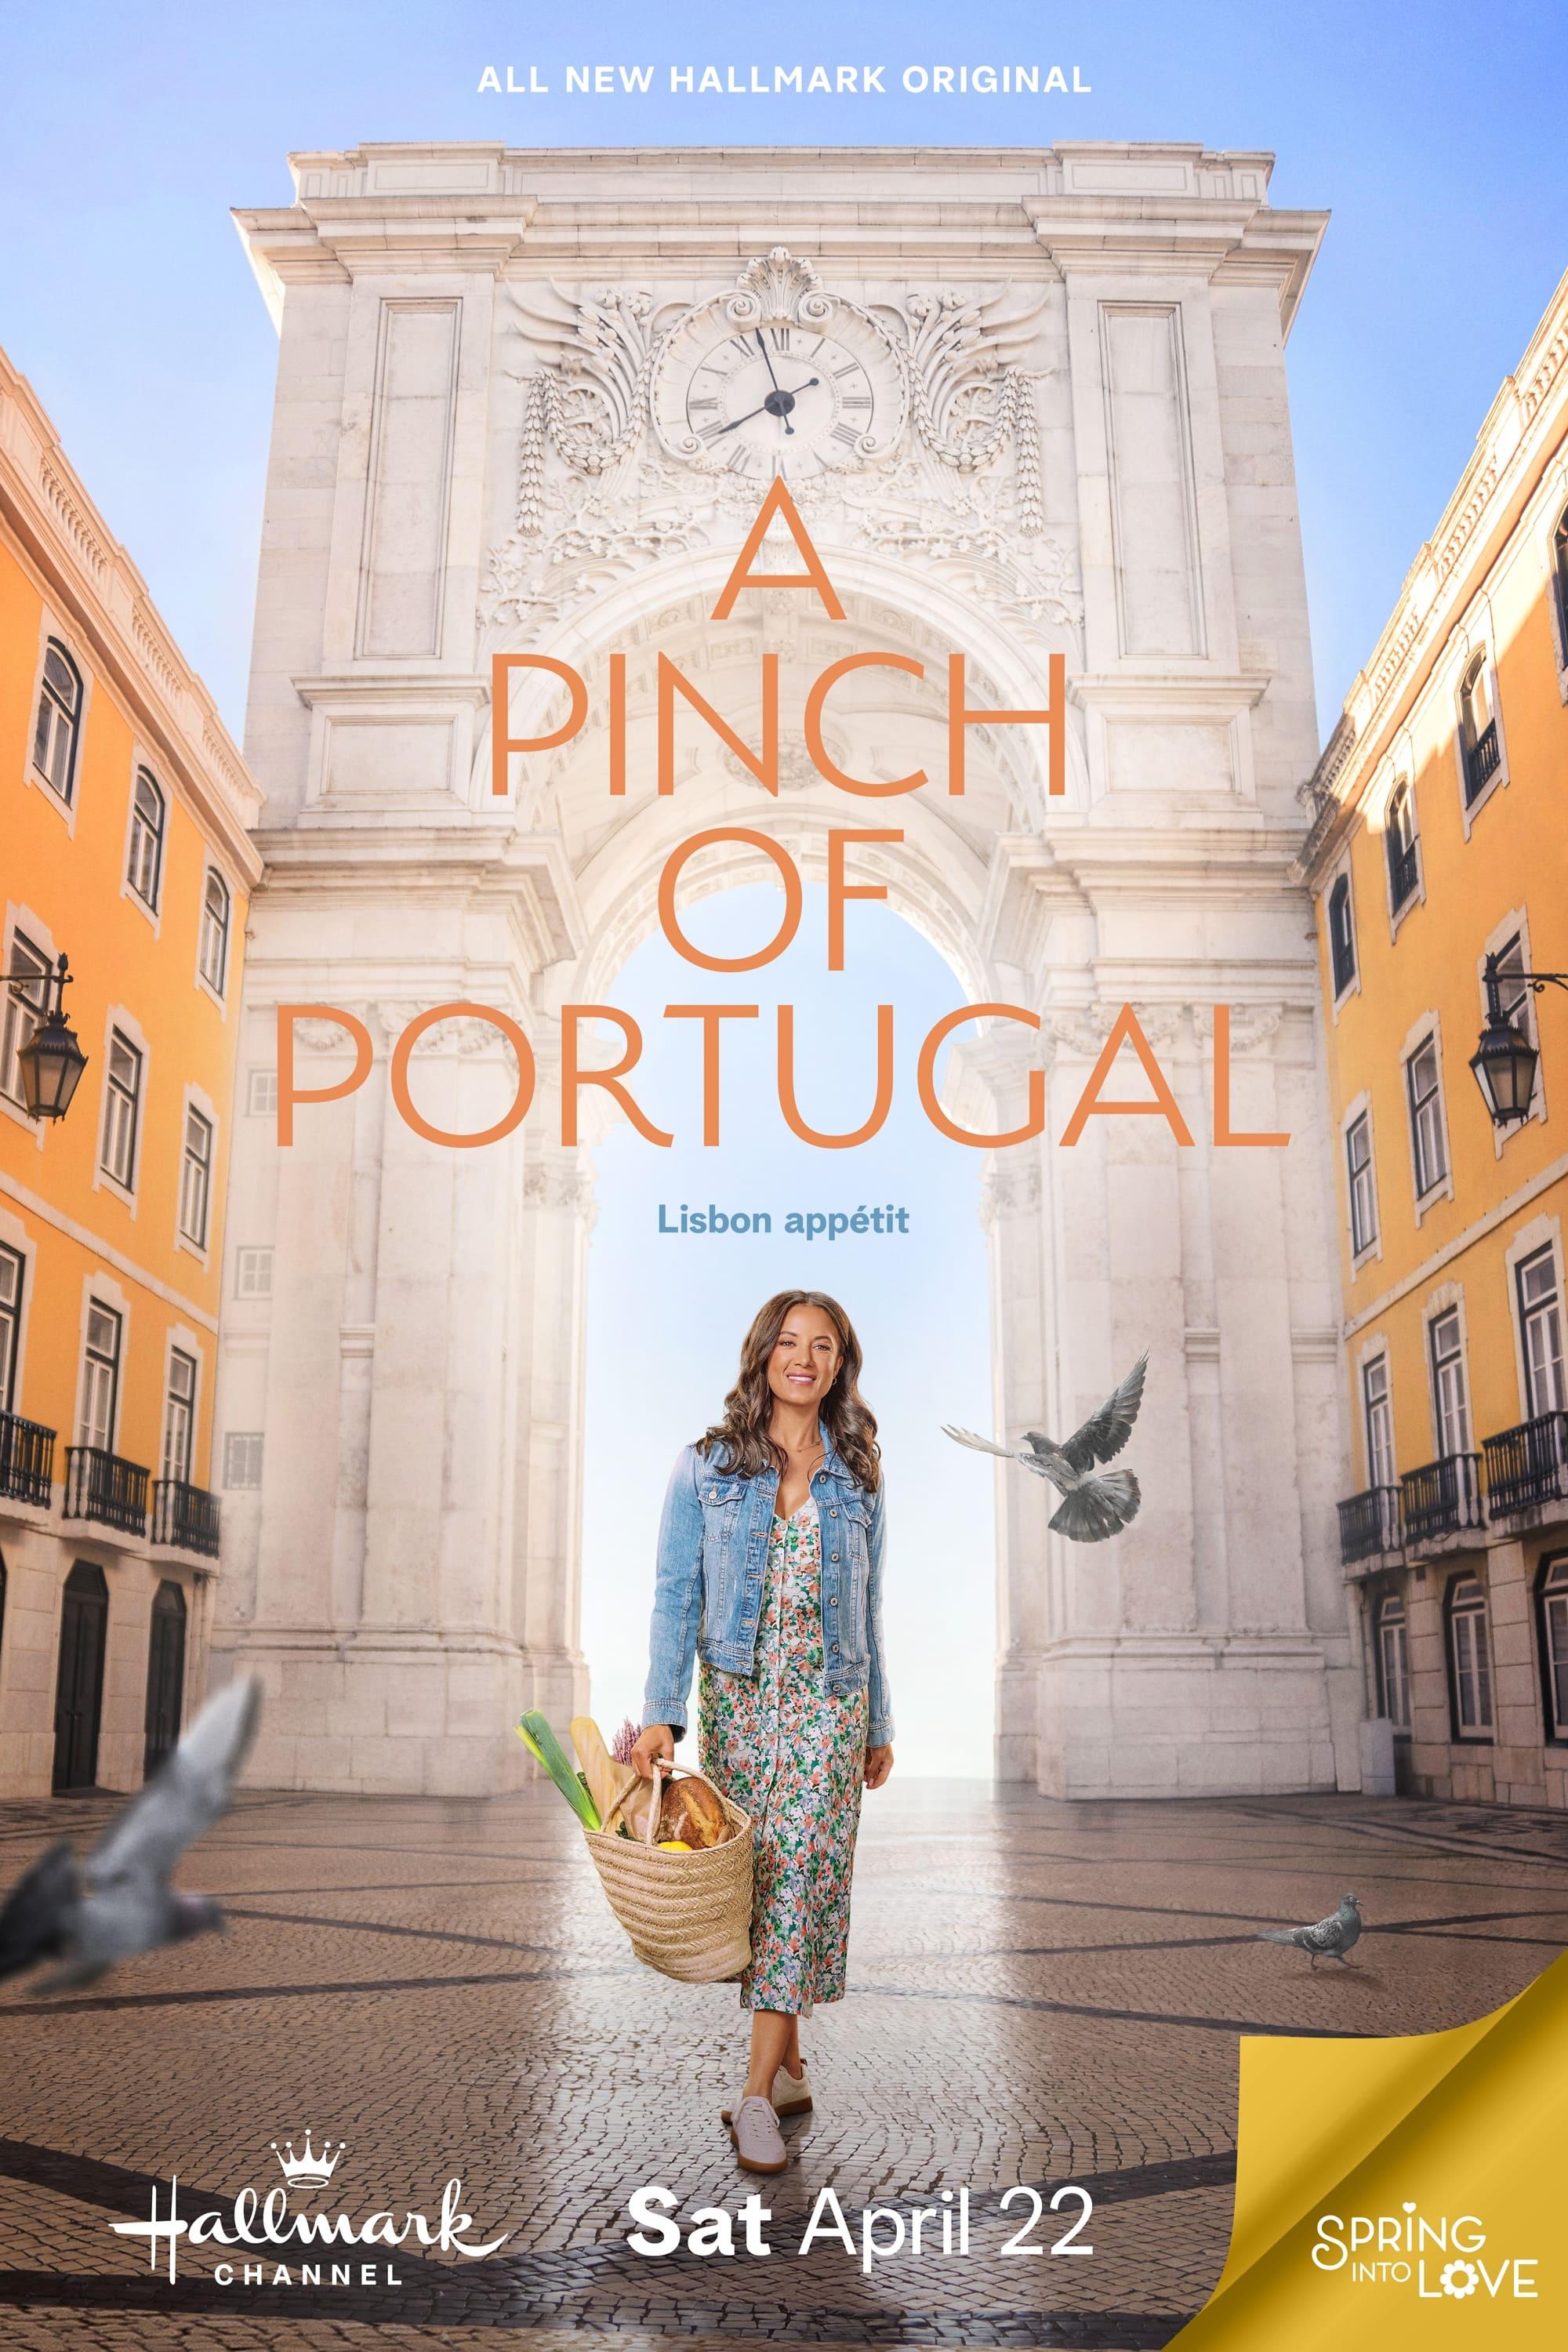 A Pinch of Portugal poster